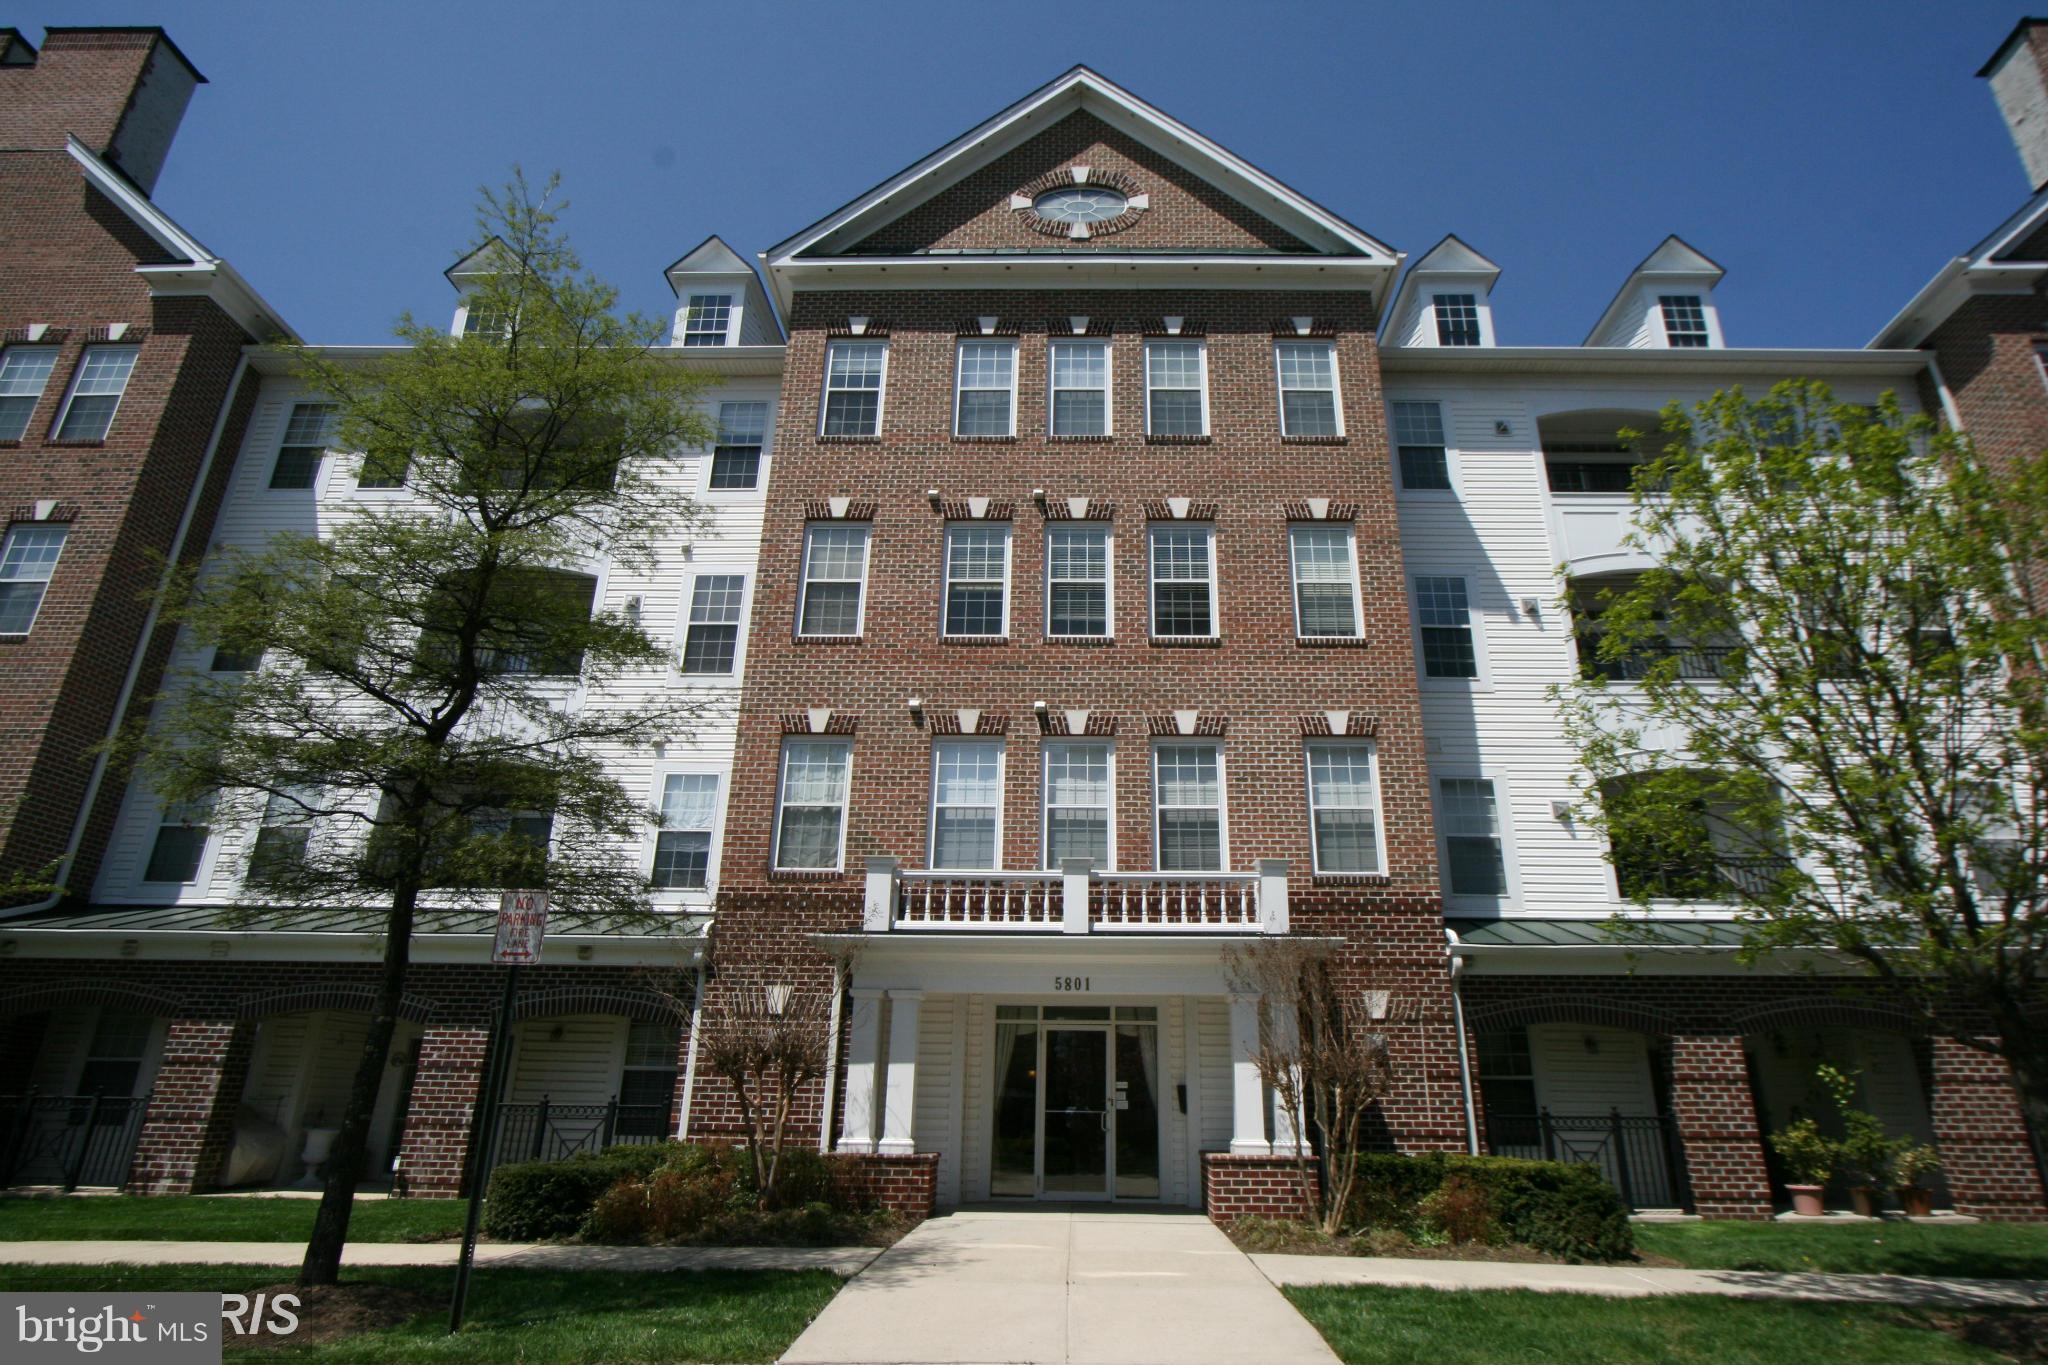 a front view of a residential apartment building with a yard